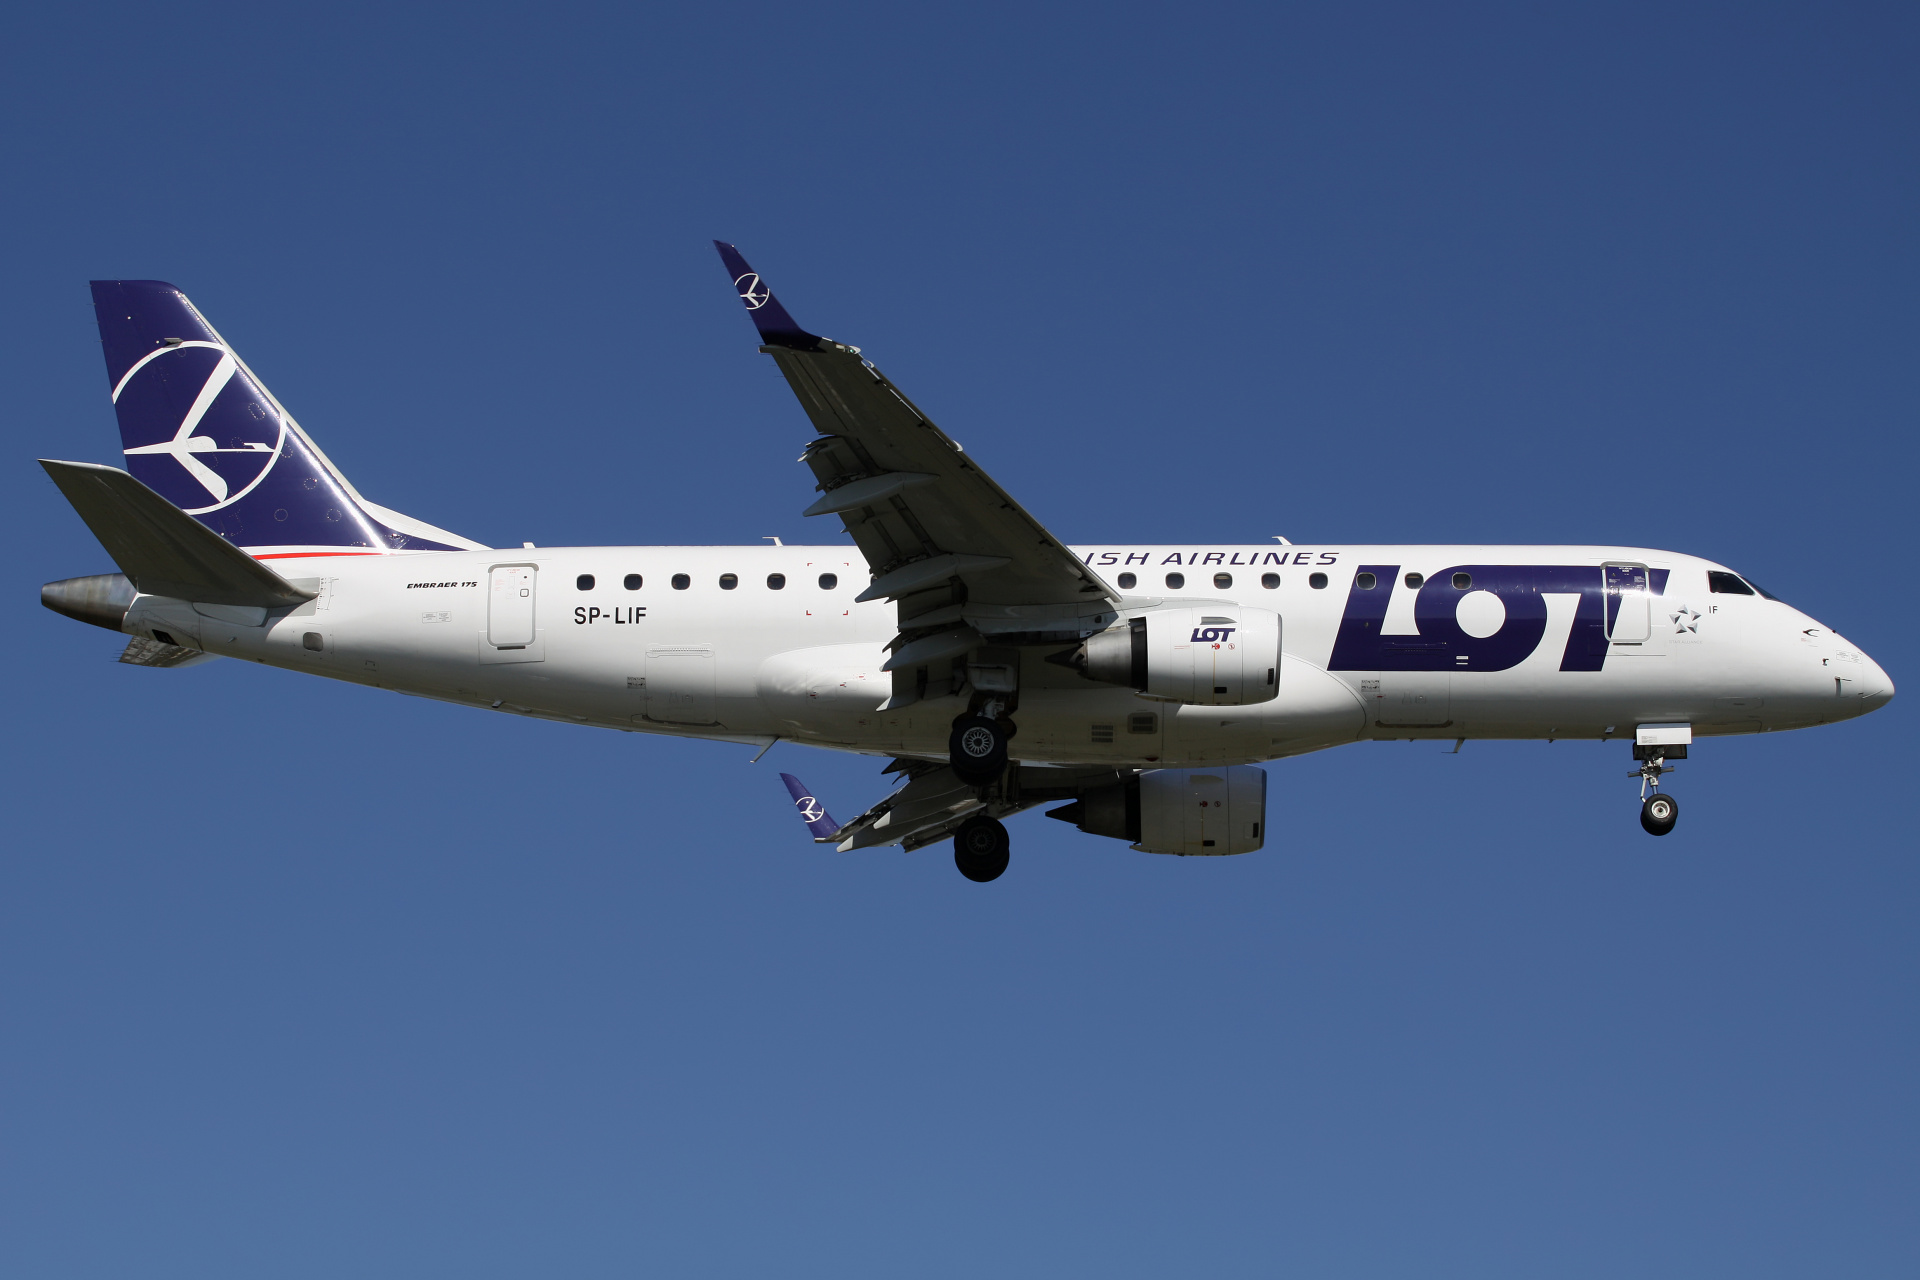 SP-LIF (new livery) (Aircraft » EPWA Spotting » Embraer E175 » LOT Polish Airlines)